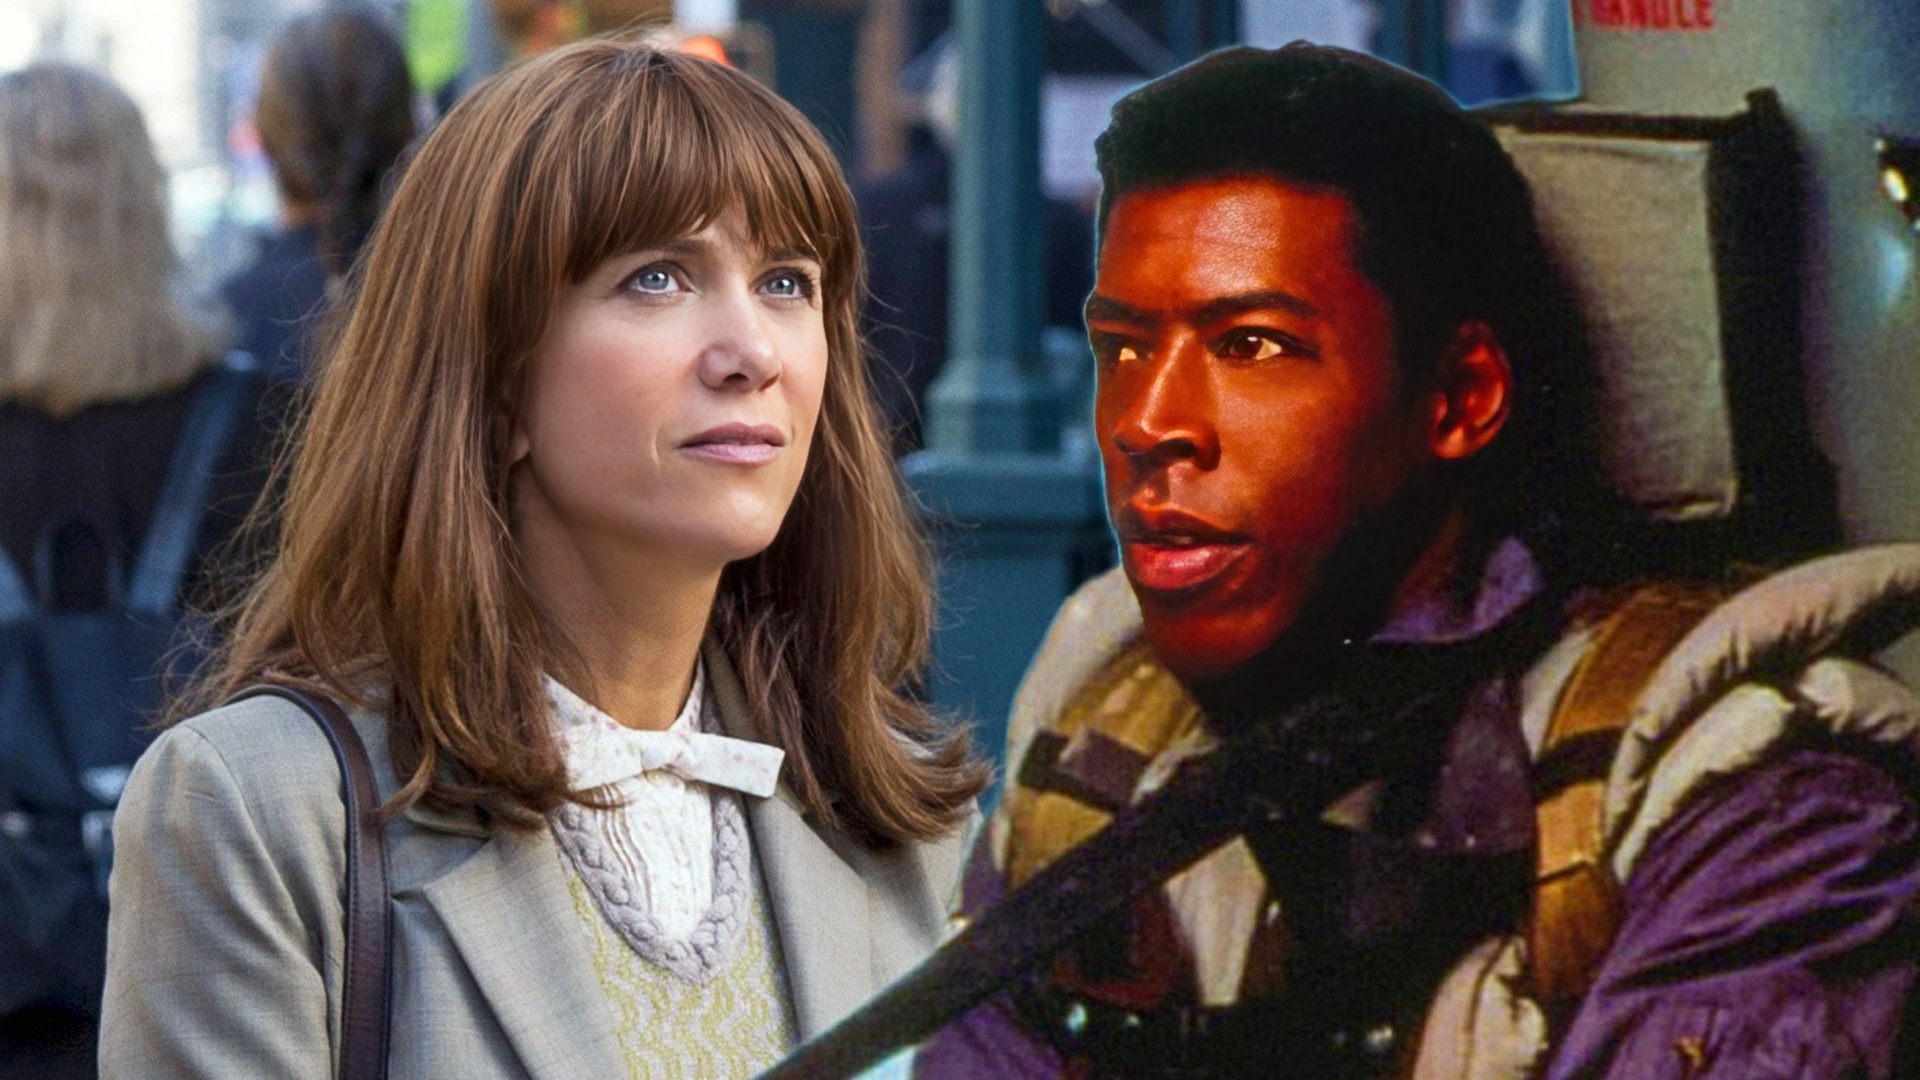 Why 2016 Fembusters Was So Hated? Ernie Hudson Has His Own Idea